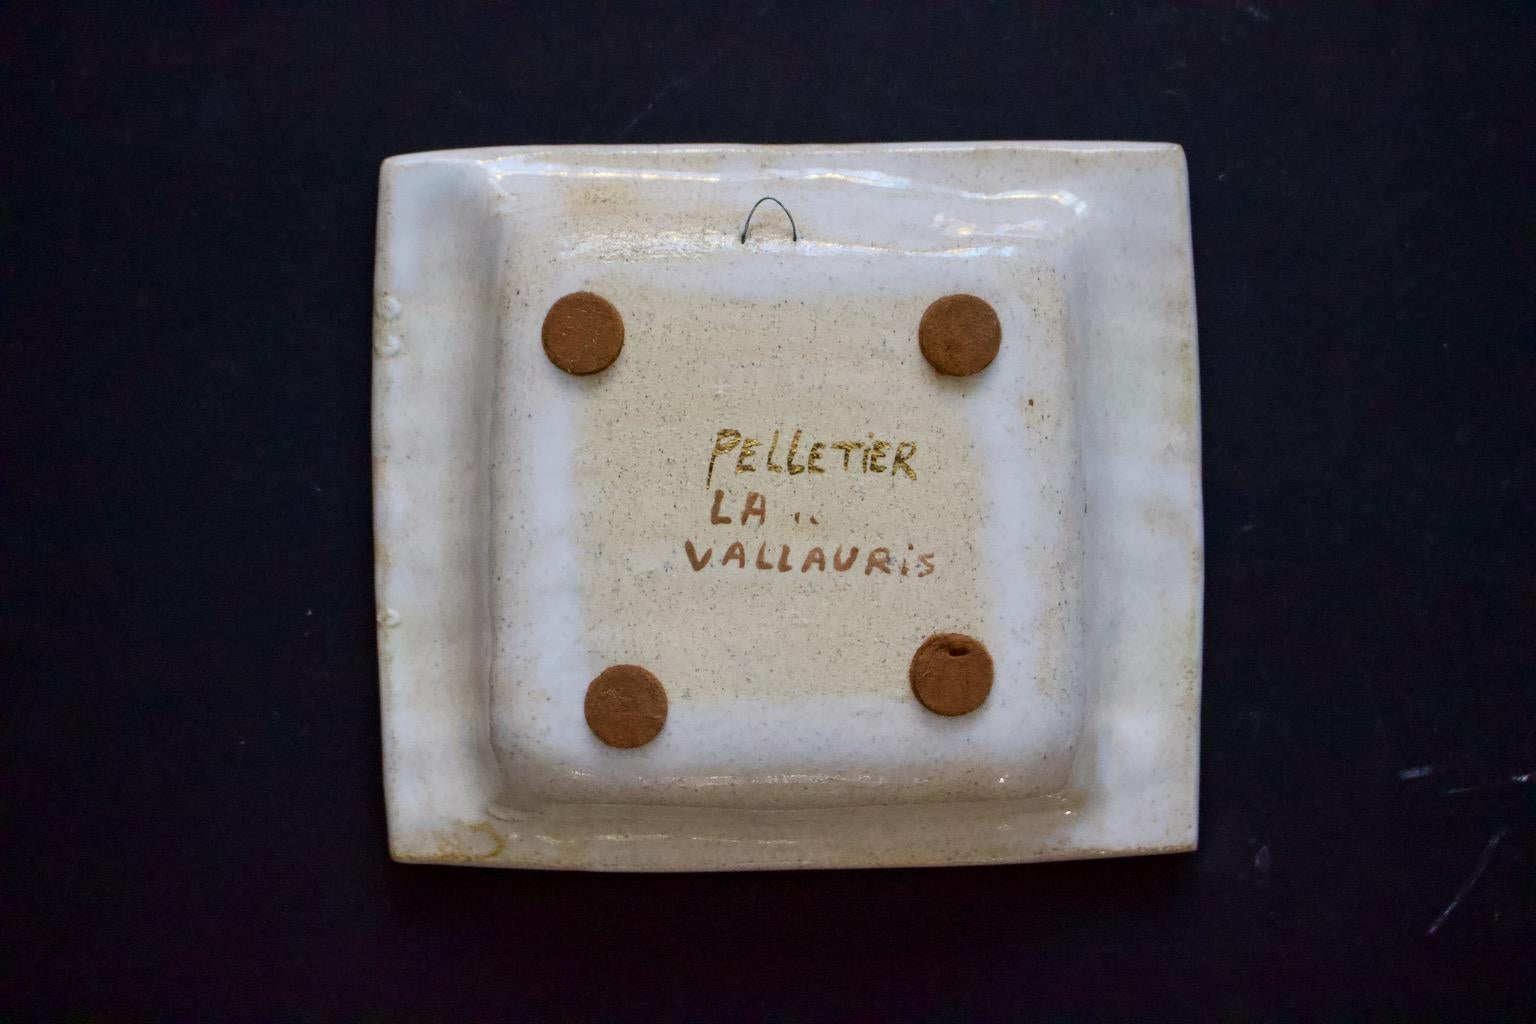 Mid-Century Modern Pelletier Ceramic Vide-Poche or Decorative Dish in Off-White and Gold, France